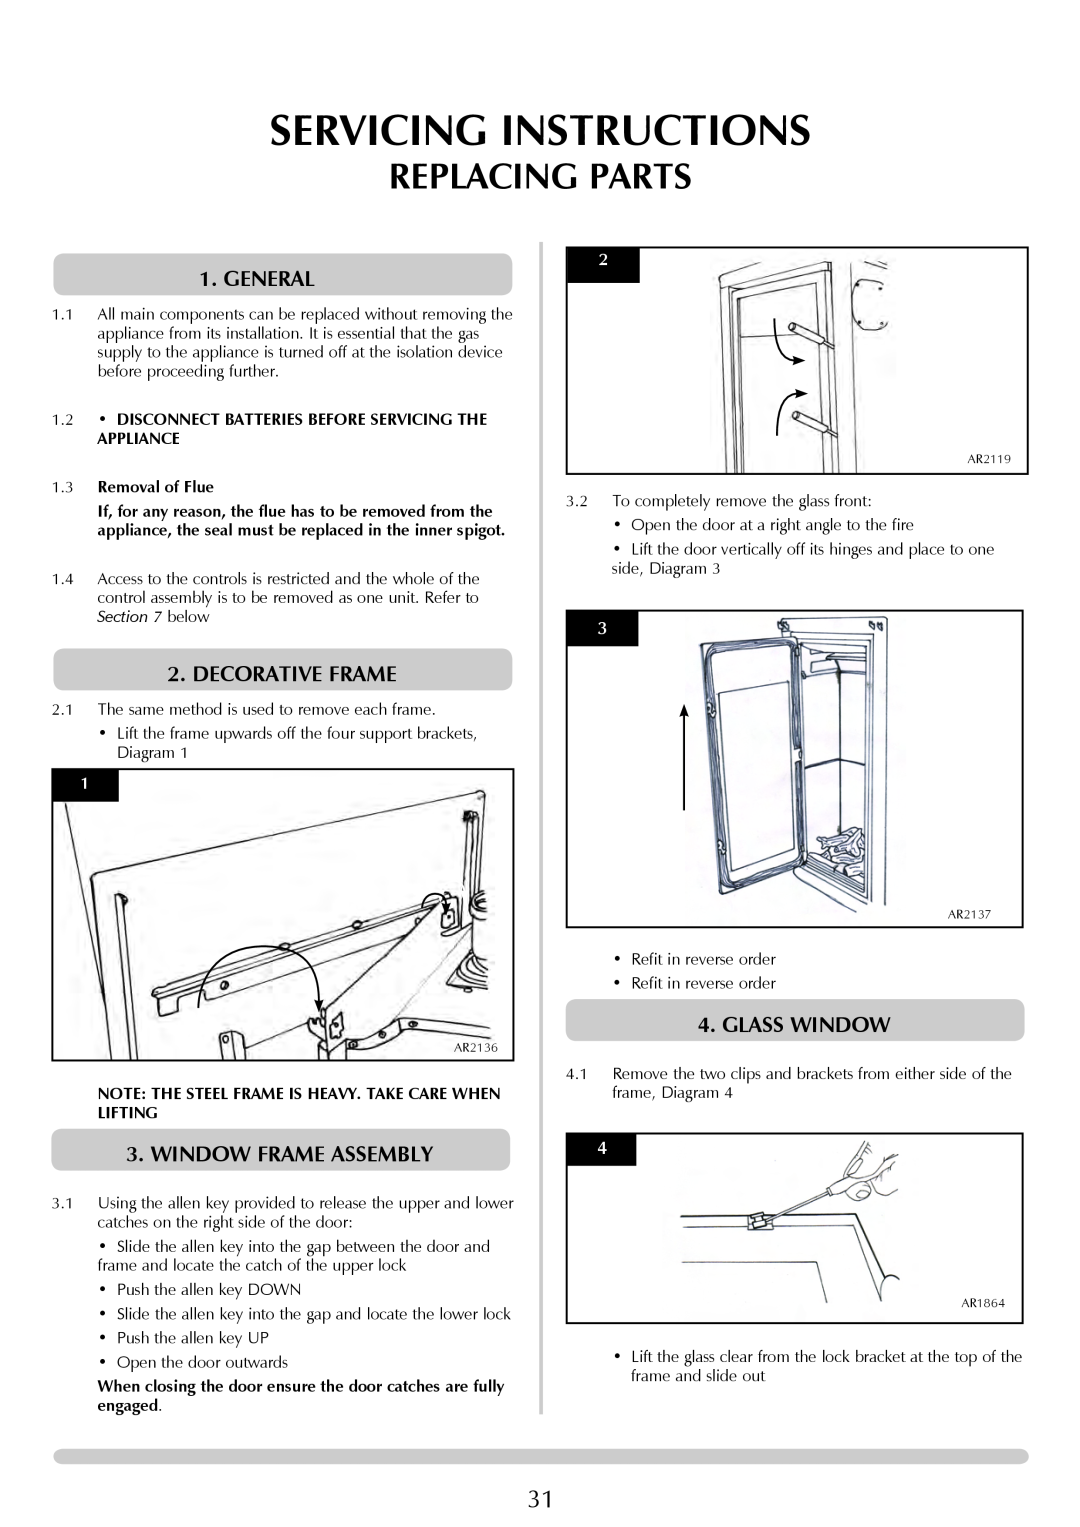 Stovax Studio 22 Replacing Parts, General, Decorative Frame, Window Frame Assembly, Glass Window, Servicing Instructions 